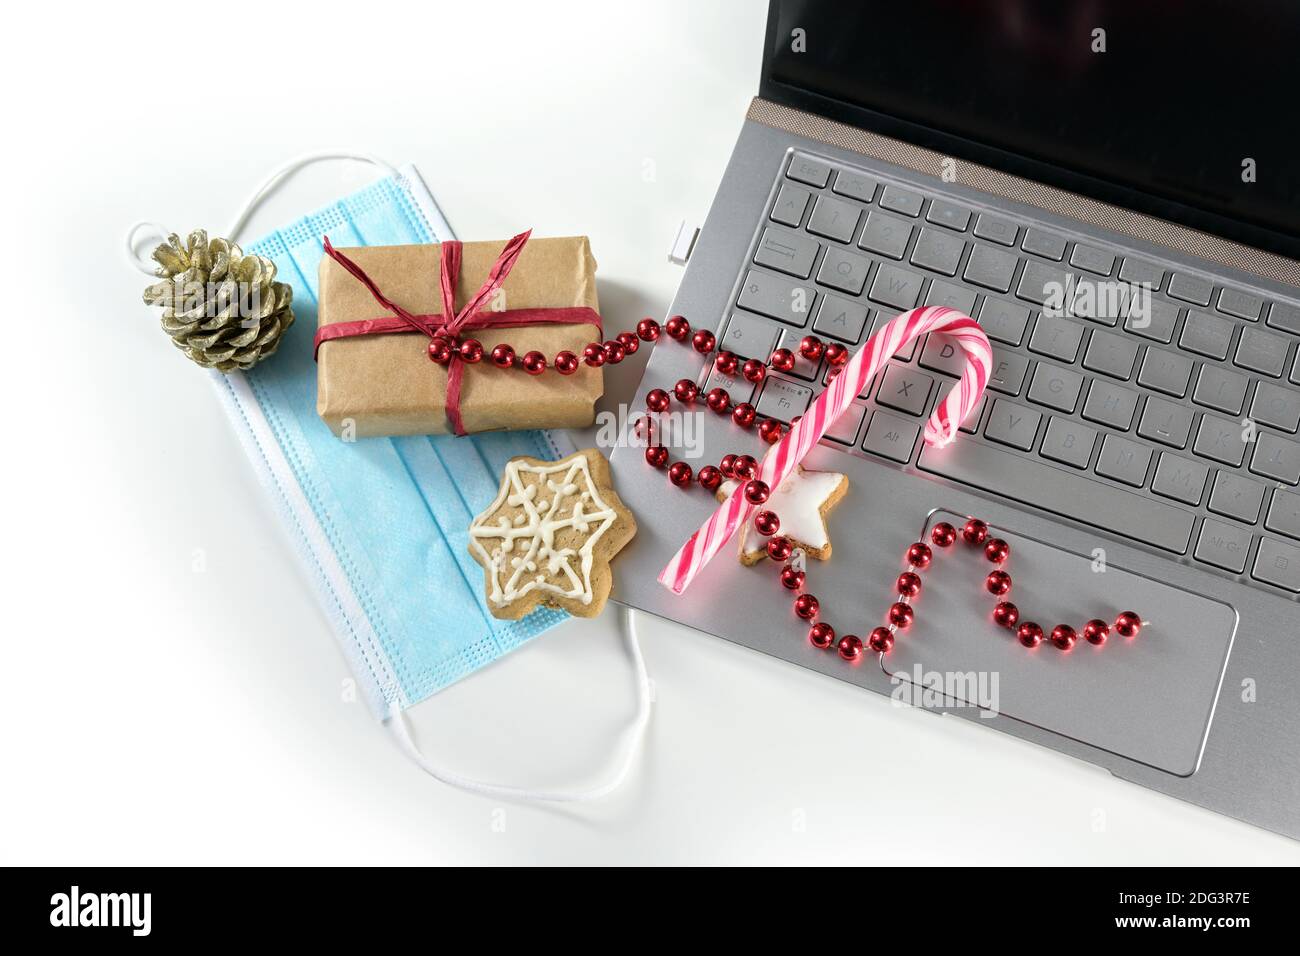 Online shopping for Christmas during coronavirus  pandemic, laptop with protective face mask, gift, sweets and holiday decoration on a white backgroun Stock Photo